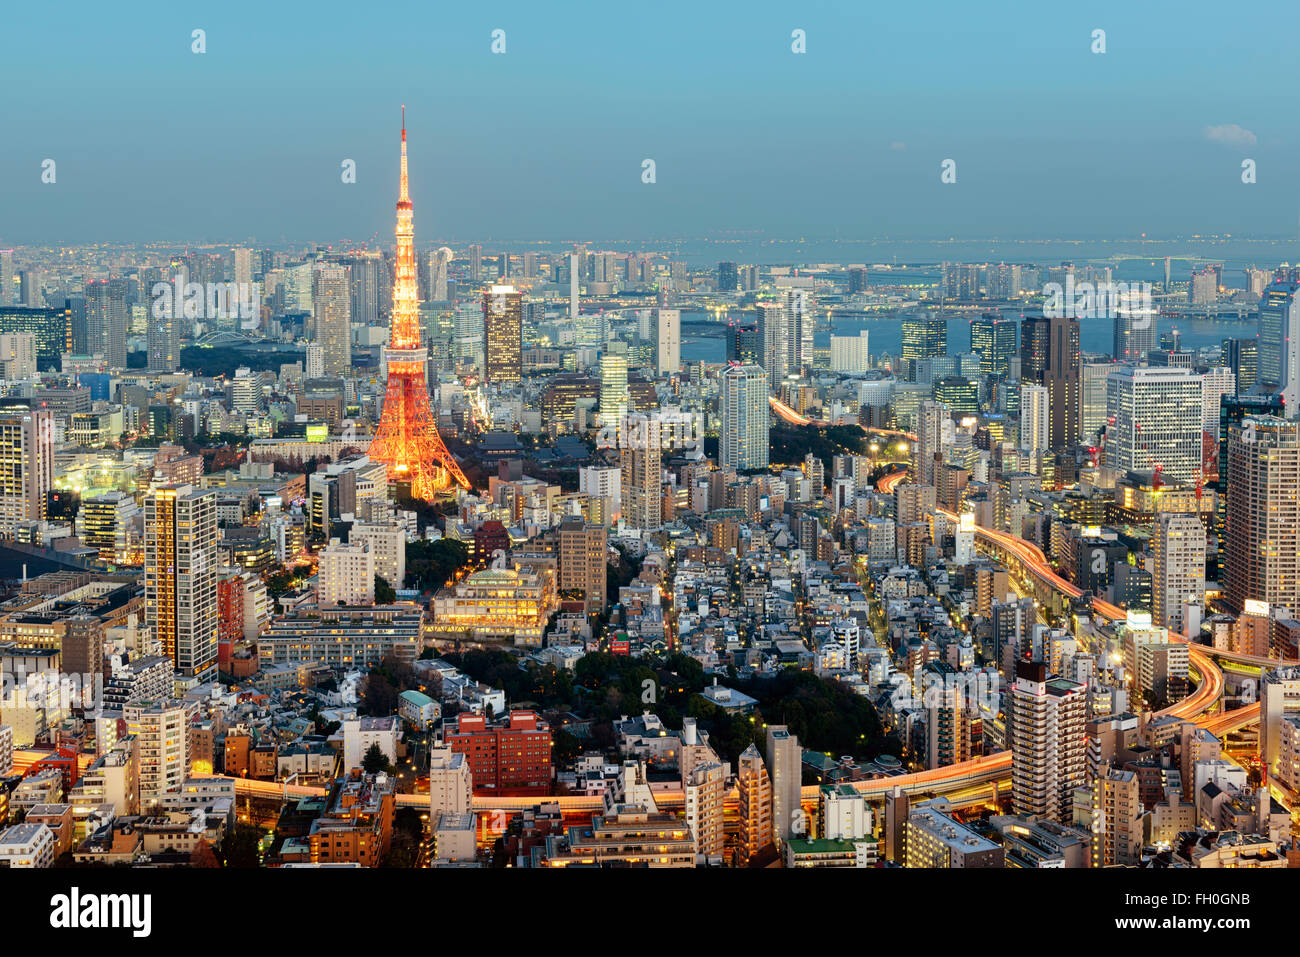 Tokyo; Japan -January 14; 2016: Night view of Tokyo Skyline with the iconic Tokyo Tower in the background. Stock Photo